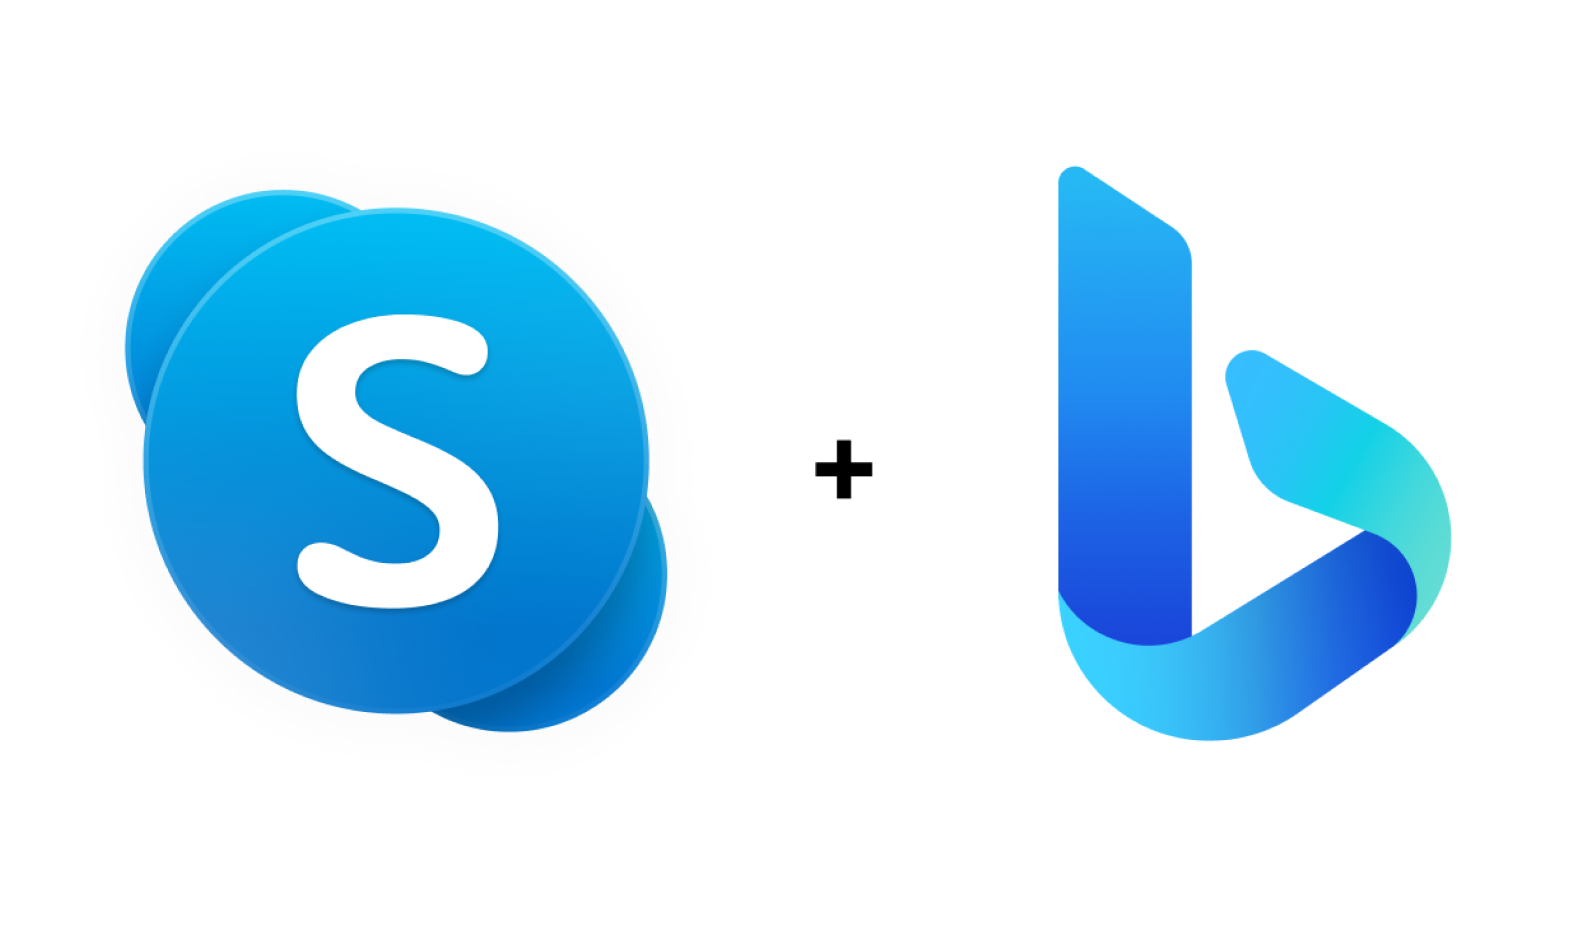 Skype on Apple M1 Mac devices with improved performance and reliability